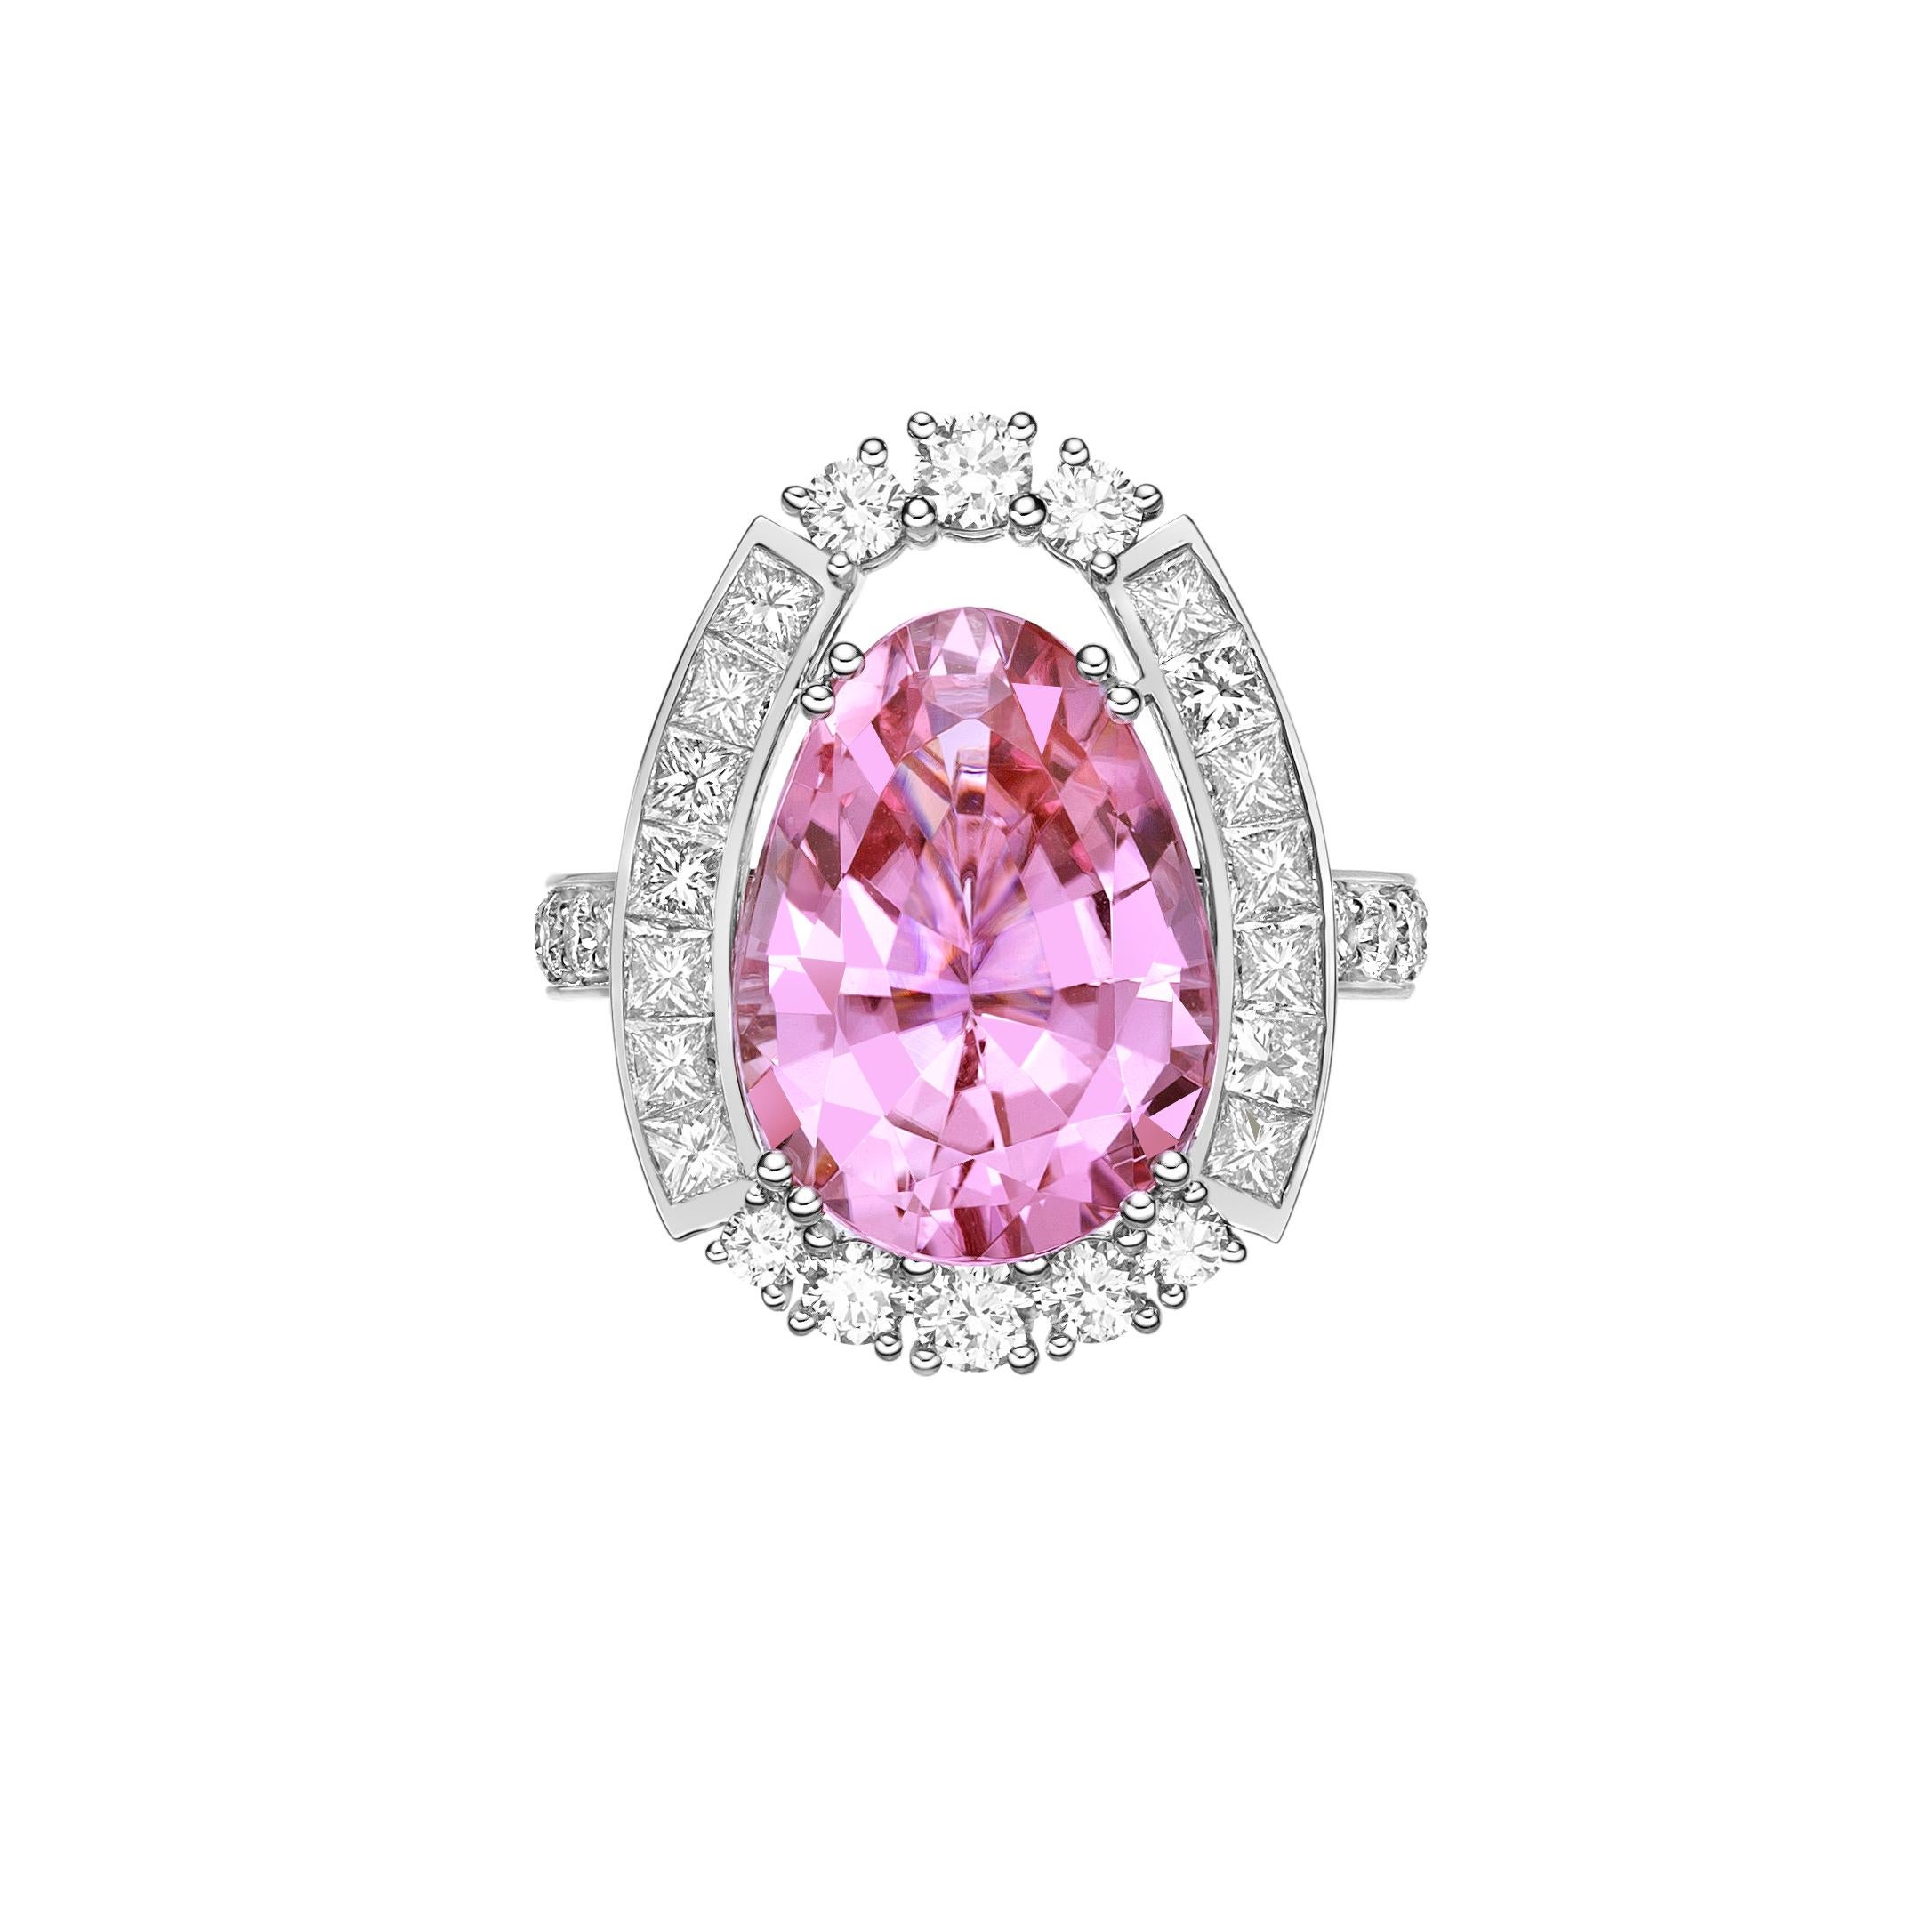 Contemporary 7.77 Carat Pink Tourmaline Ring in 18Karat White Gold with Diamond.  For Sale